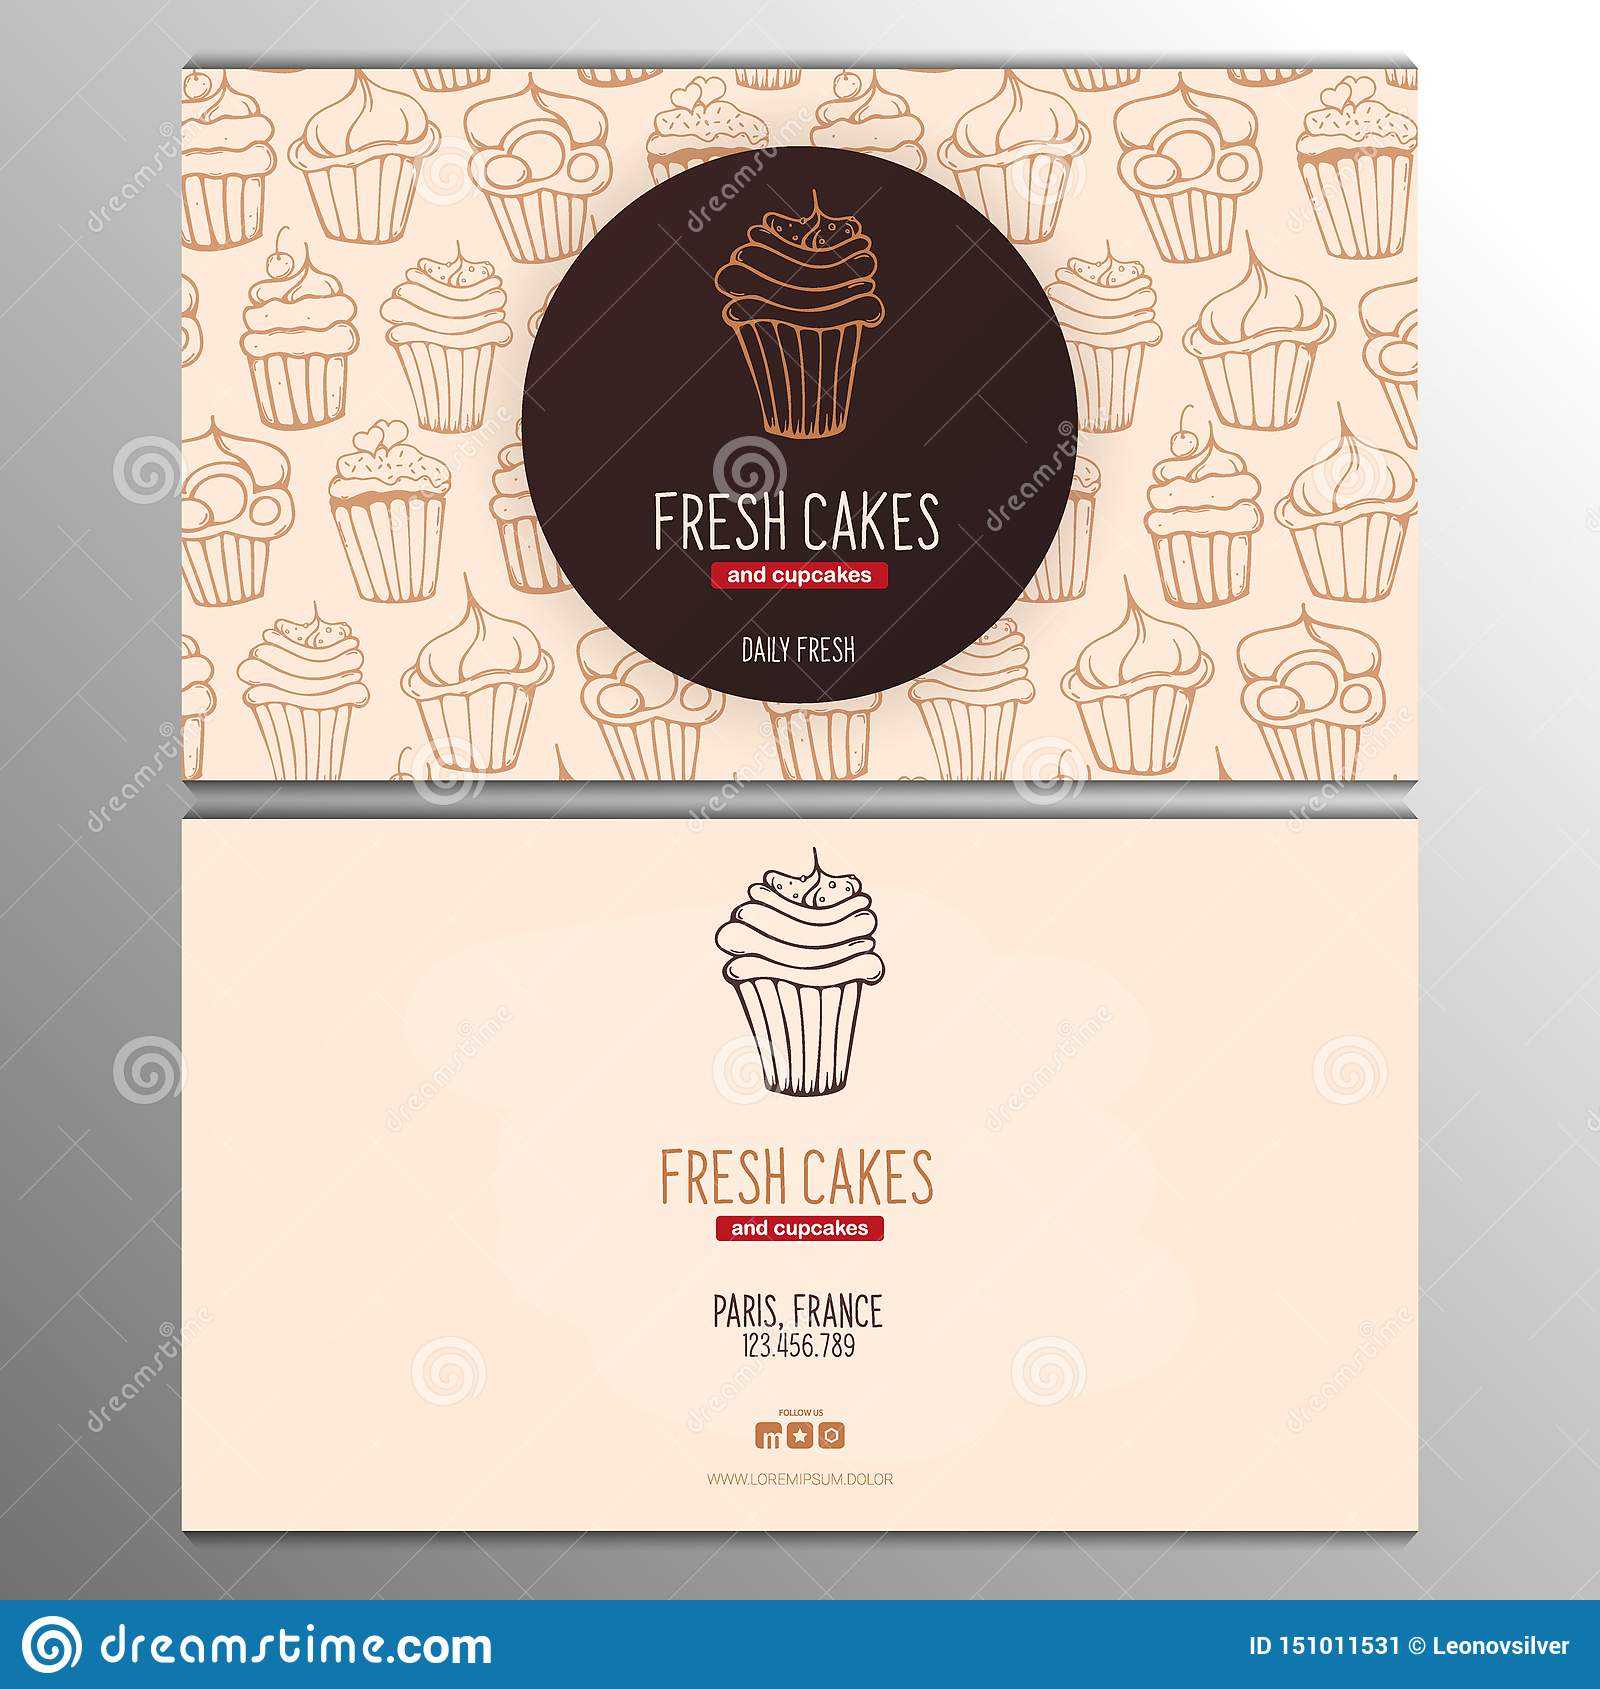 Cupcake Or Cake Business Card Template For Bakery Or Pastry Within Cake Business Cards Templates Free